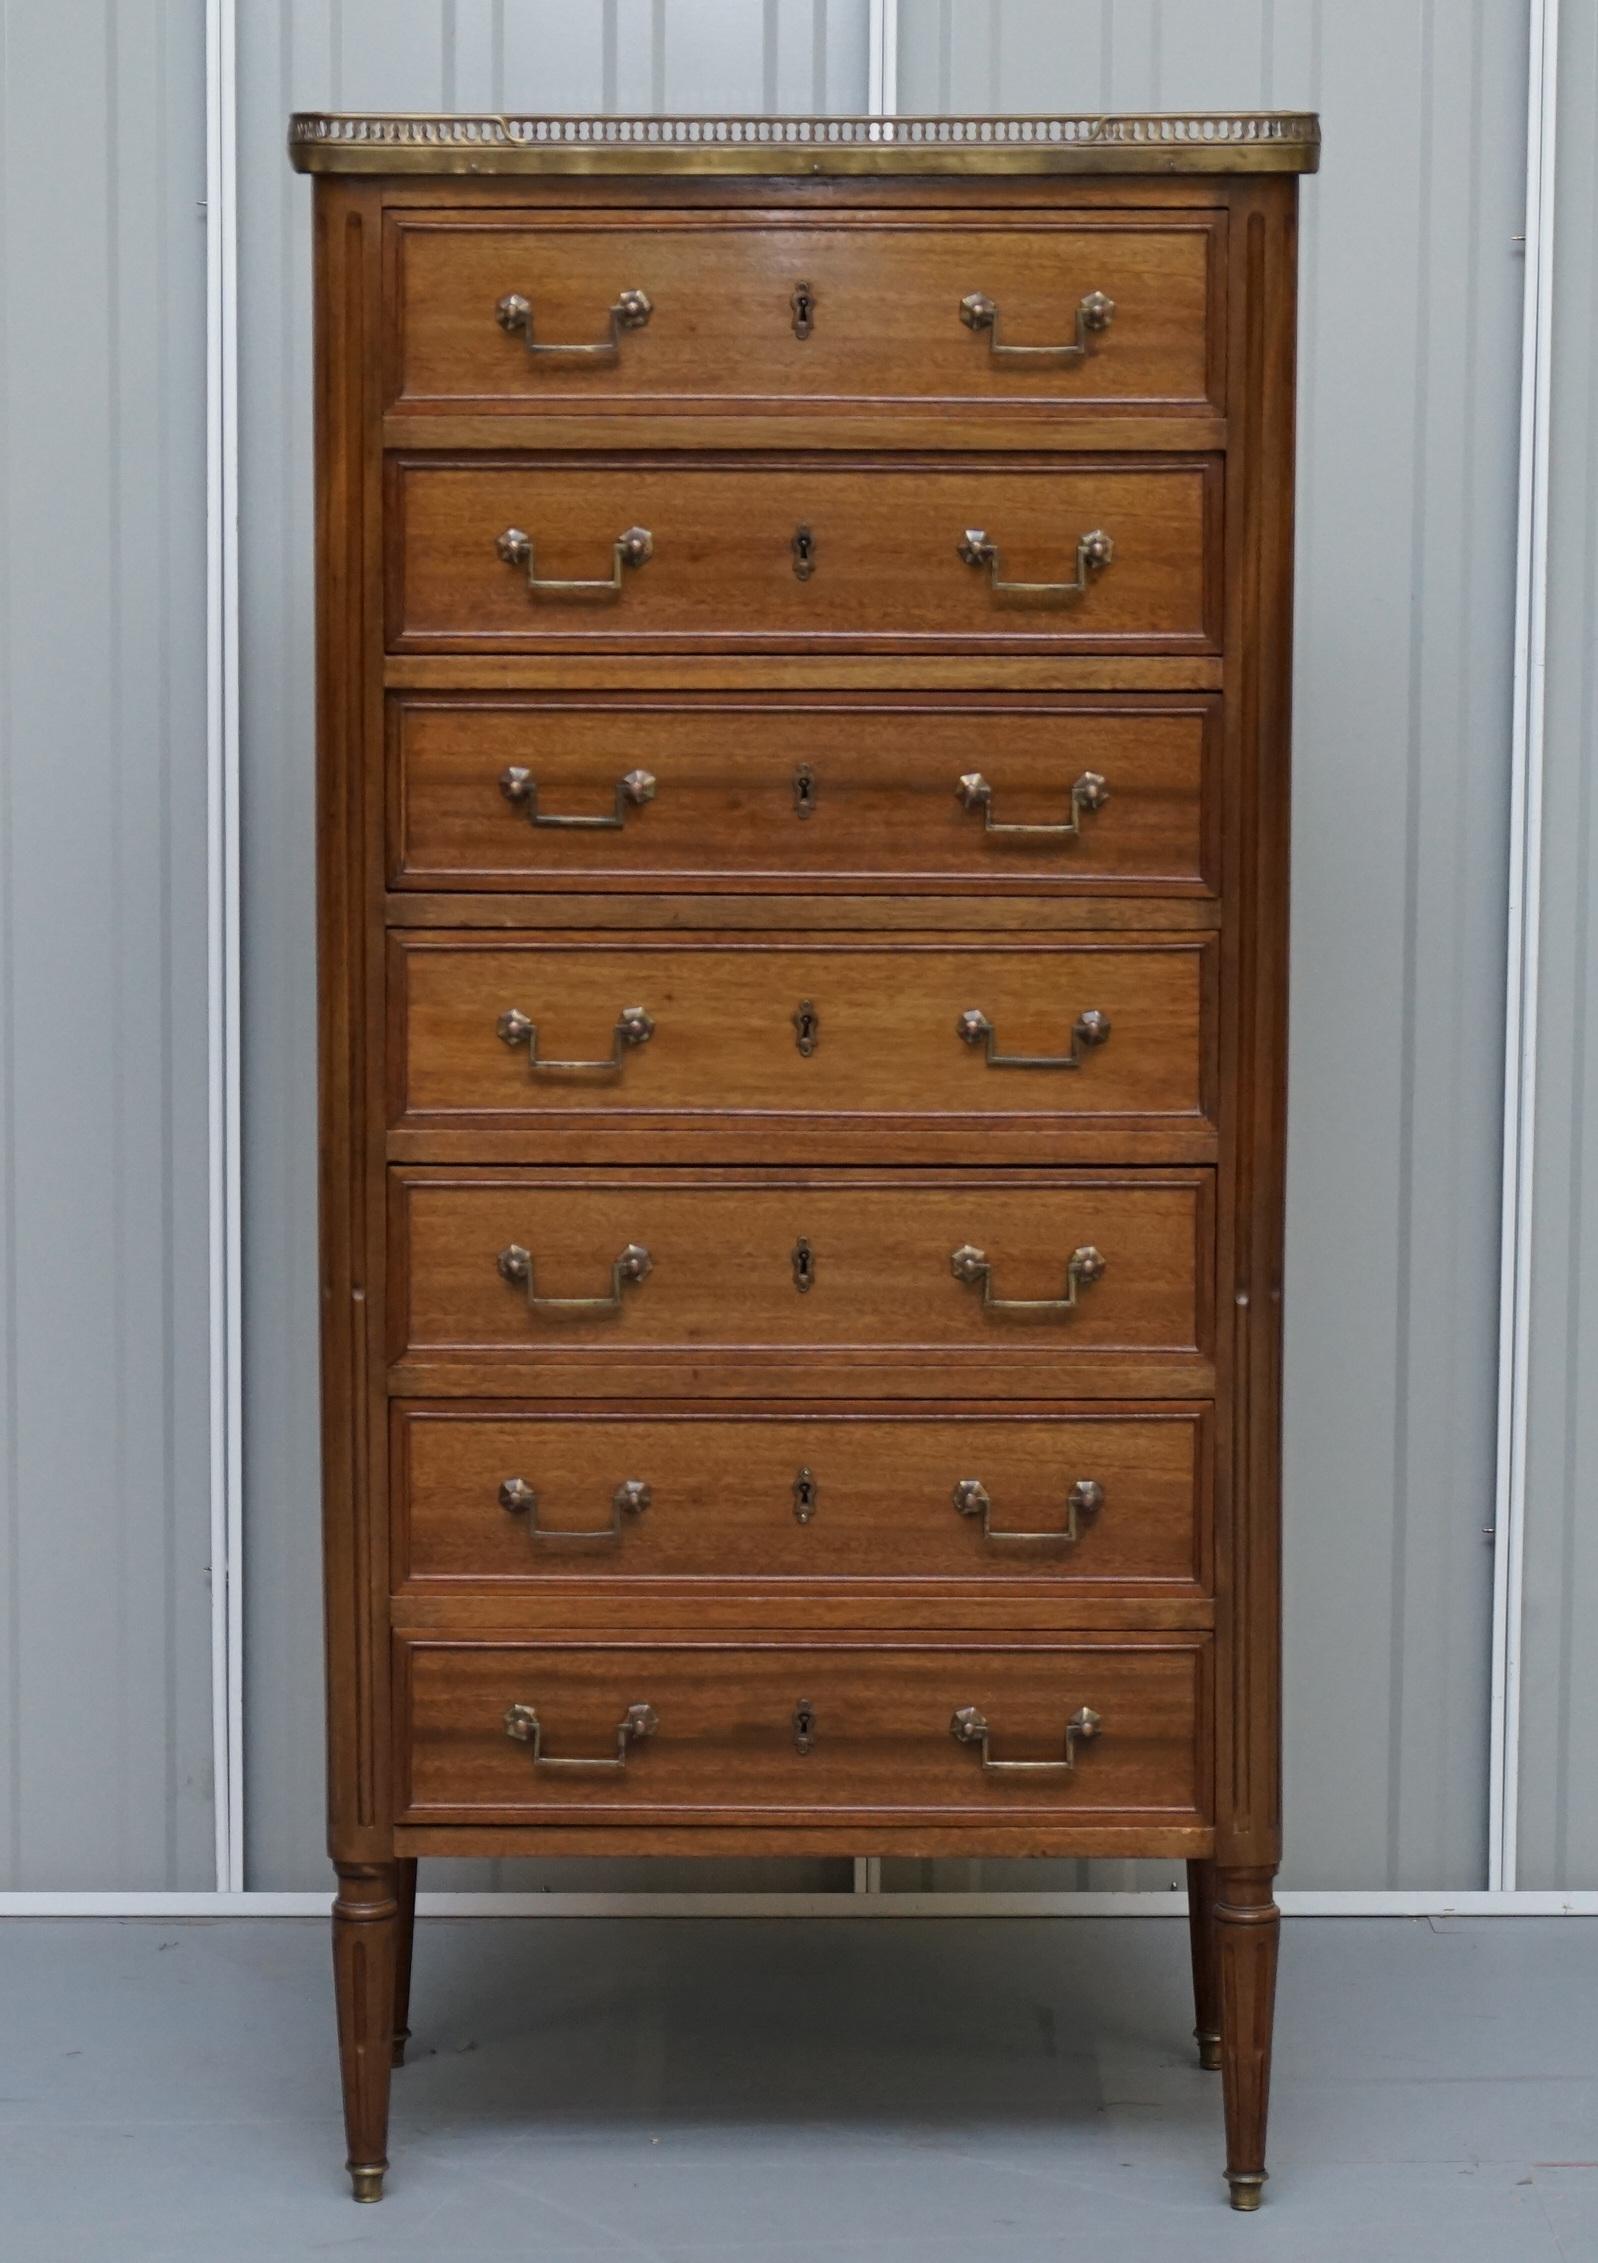 We are delighted to this very rare and extremely good looking French 19th century mahogany with marble top and brass gallery rail Semainier lingerie chest of drawers

This French 19th century Louis XVI-style seminar, or lingerie chest, circa 1880,